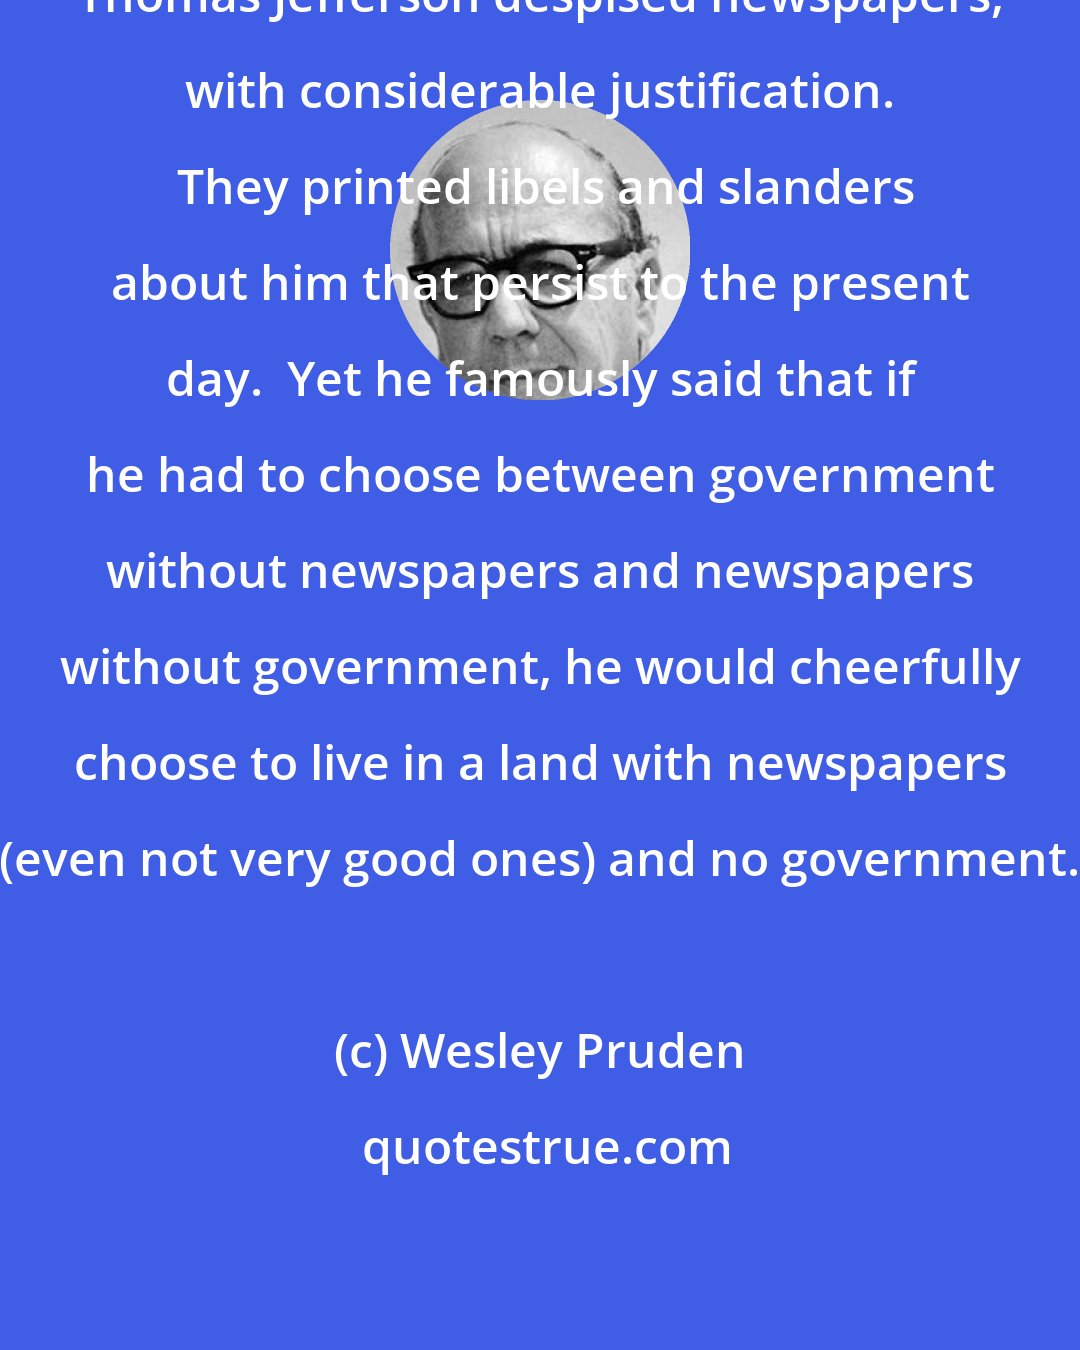 Wesley Pruden: Thomas Jefferson despised newspapers, with considerable justification.  They printed libels and slanders about him that persist to the present day.  Yet he famously said that if he had to choose between government without newspapers and newspapers without government, he would cheerfully choose to live in a land with newspapers (even not very good ones) and no government.